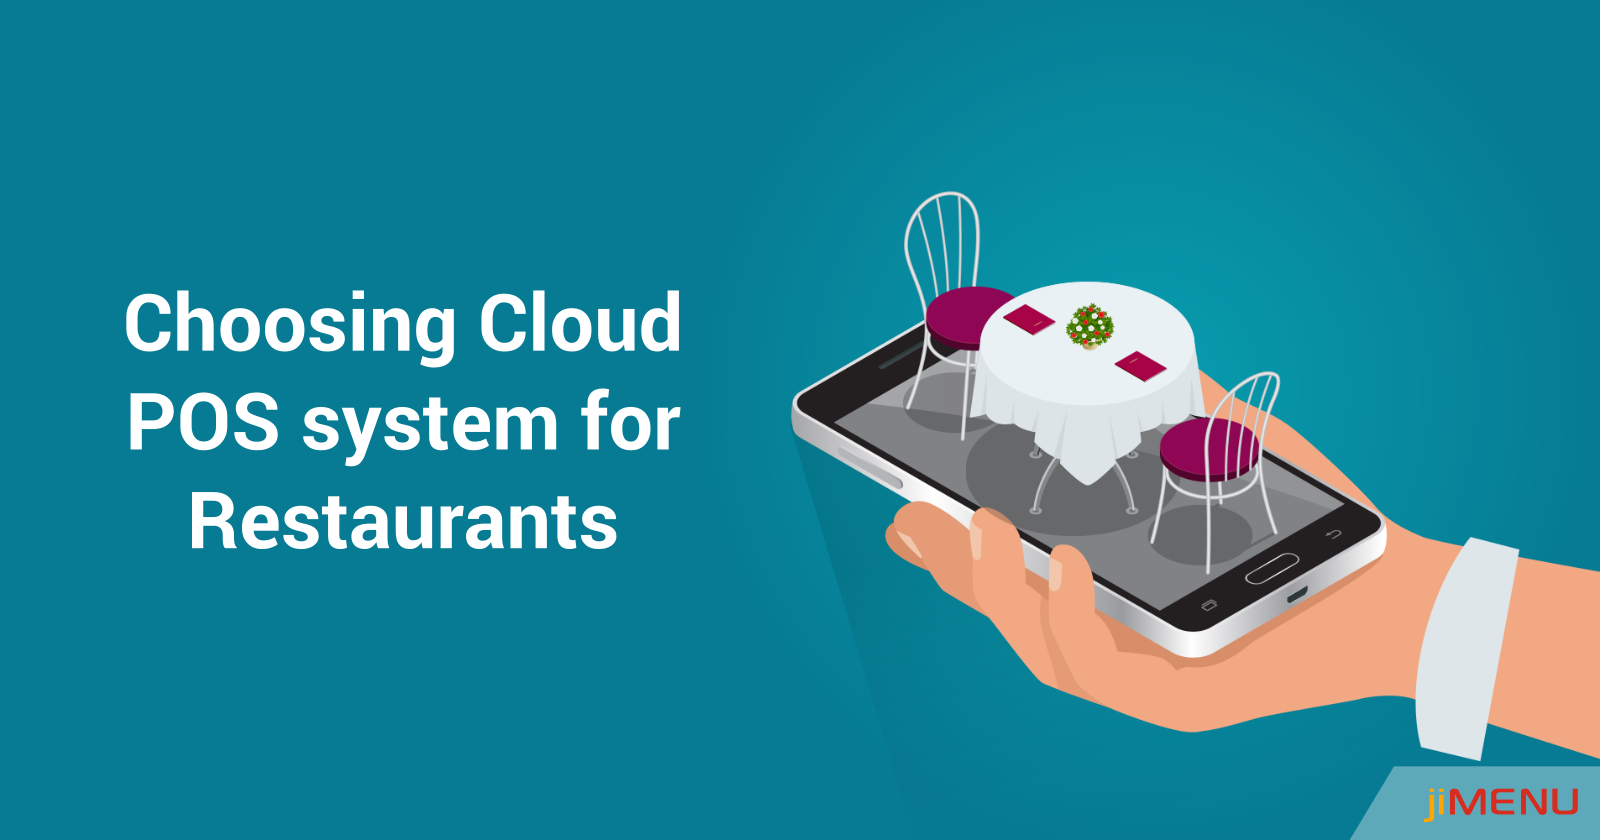 Why Cloud POS systems Dominate Traditional POS systems?